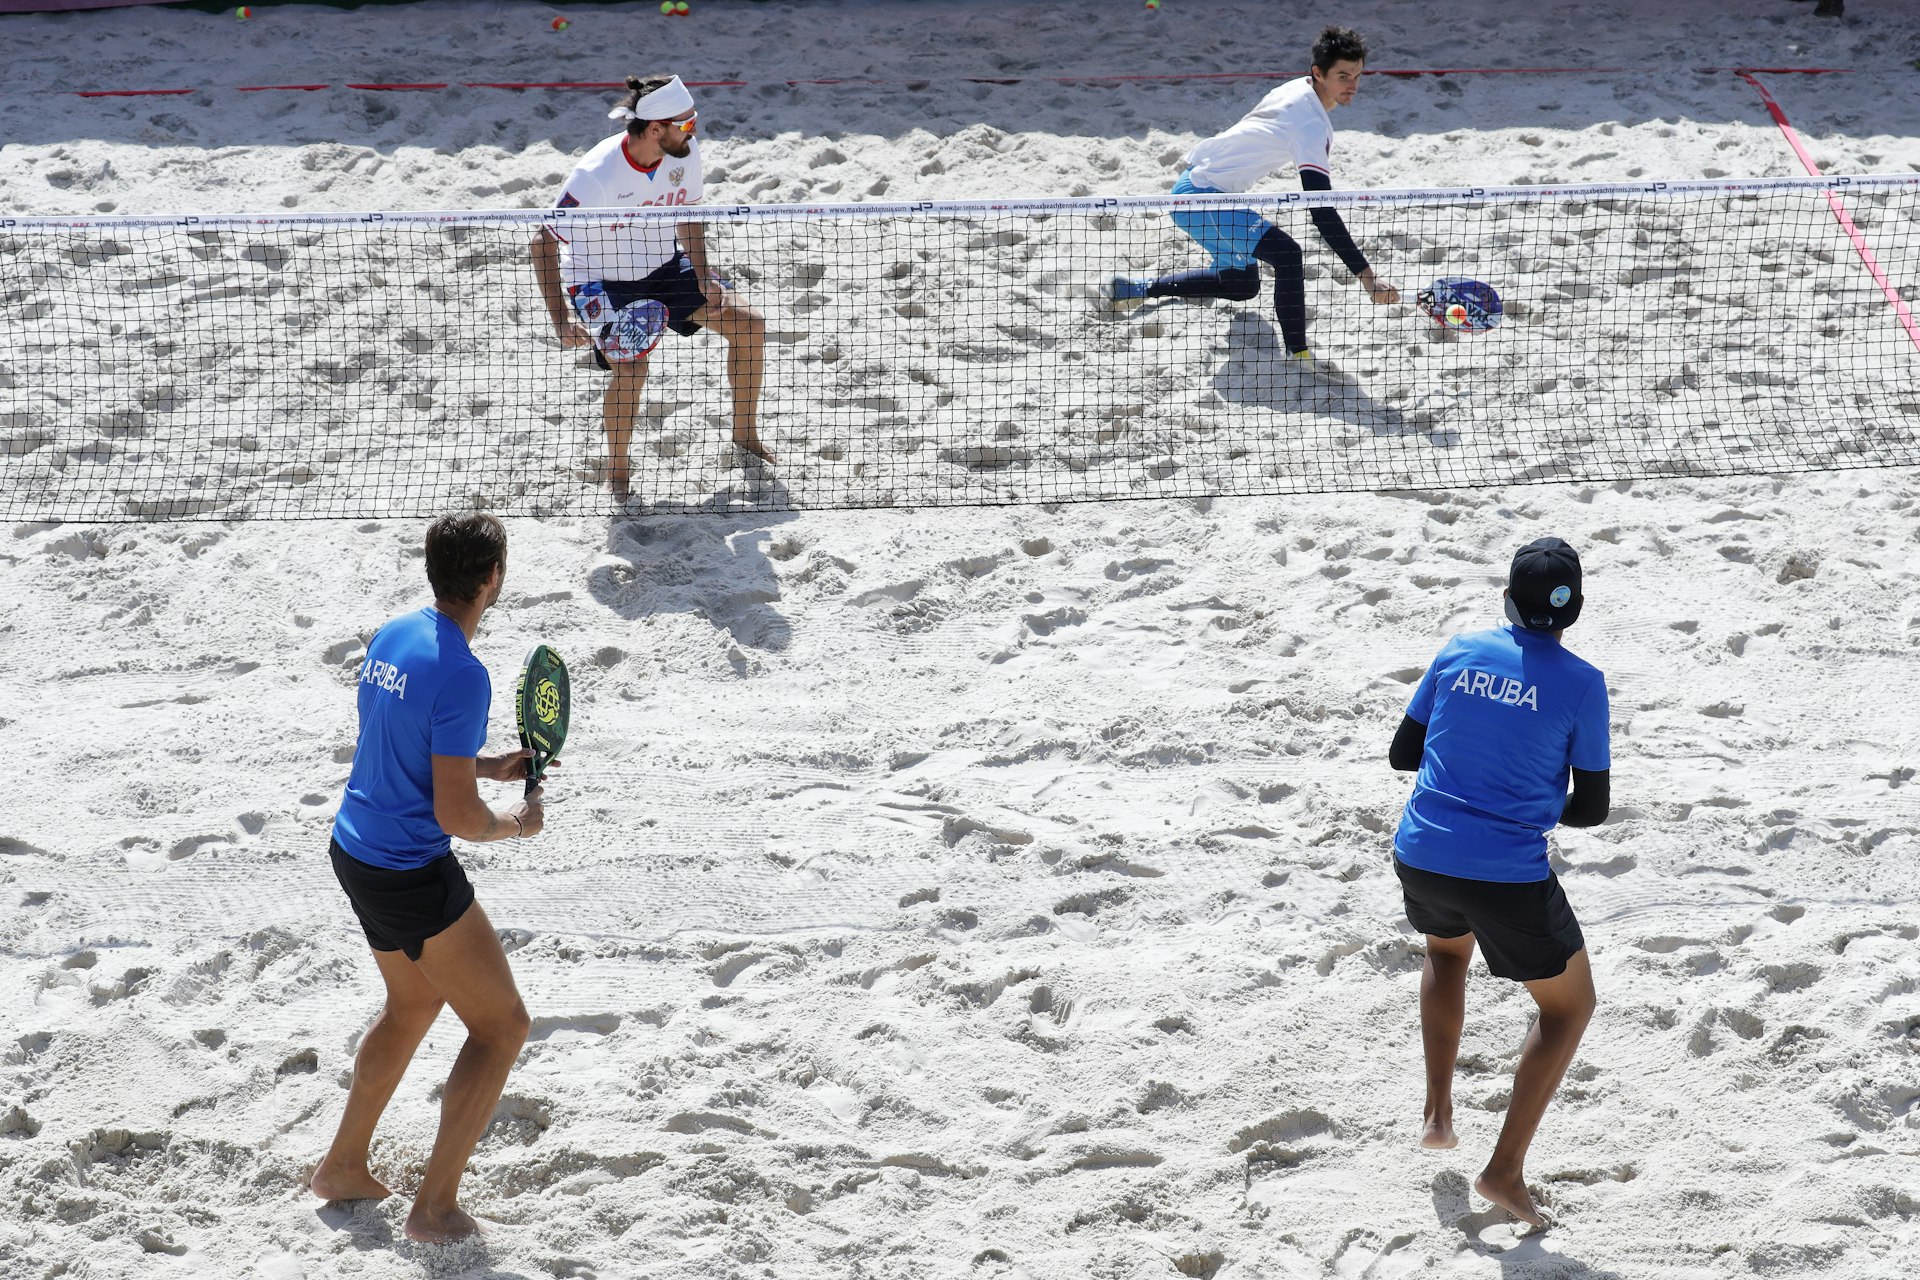 A pair of two-man teams, one wearing blue tops from Aruba and the other wearing white tops from Russia, play tennis on white sand.